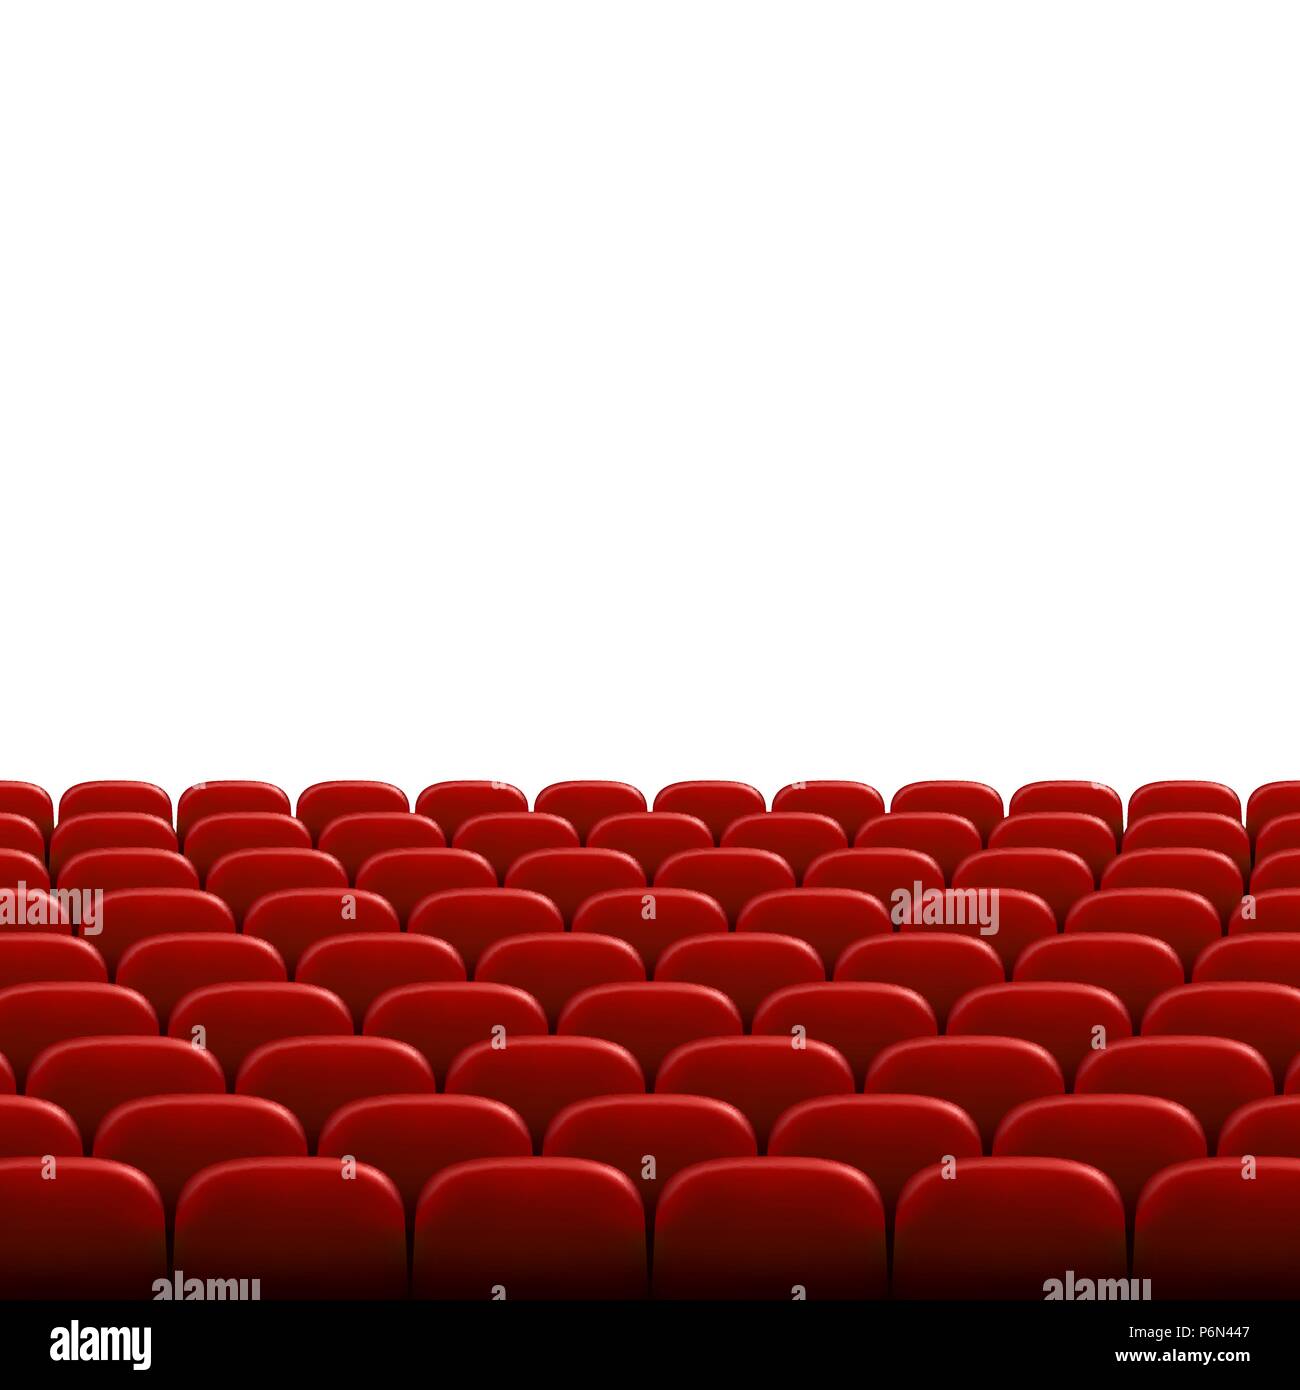 Rows of red cinema or theater seats in front of white blank screen. Wide empty movie theater auditorium with red seats. Vector illustration Stock Vector